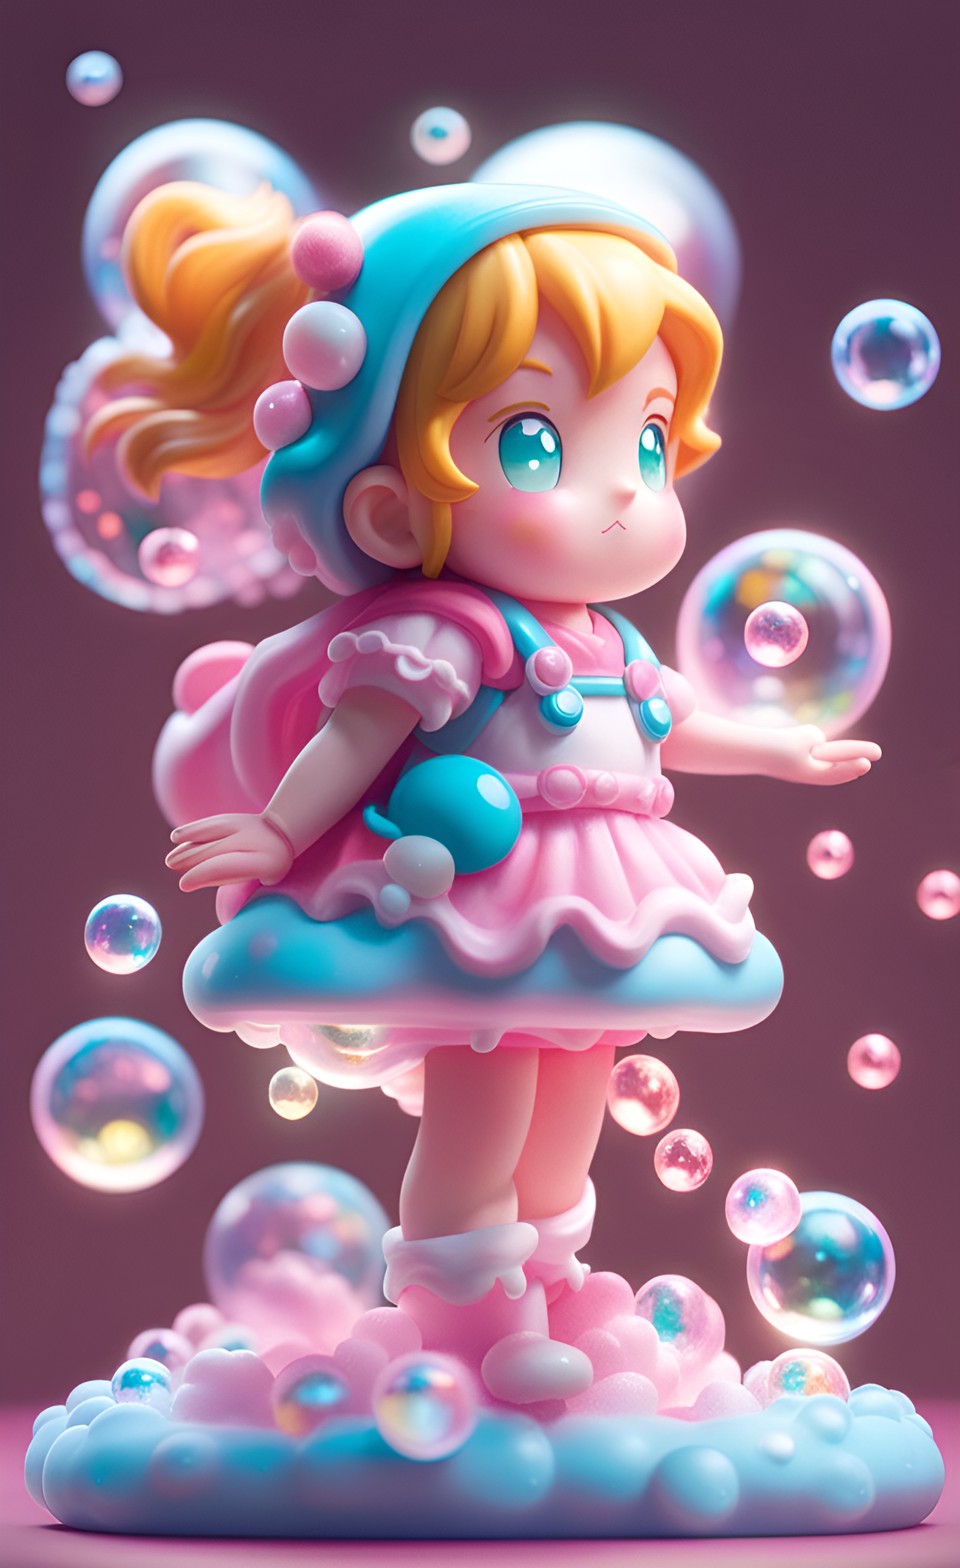 Illustration of a magical anime girl encased in a shimmering bubble